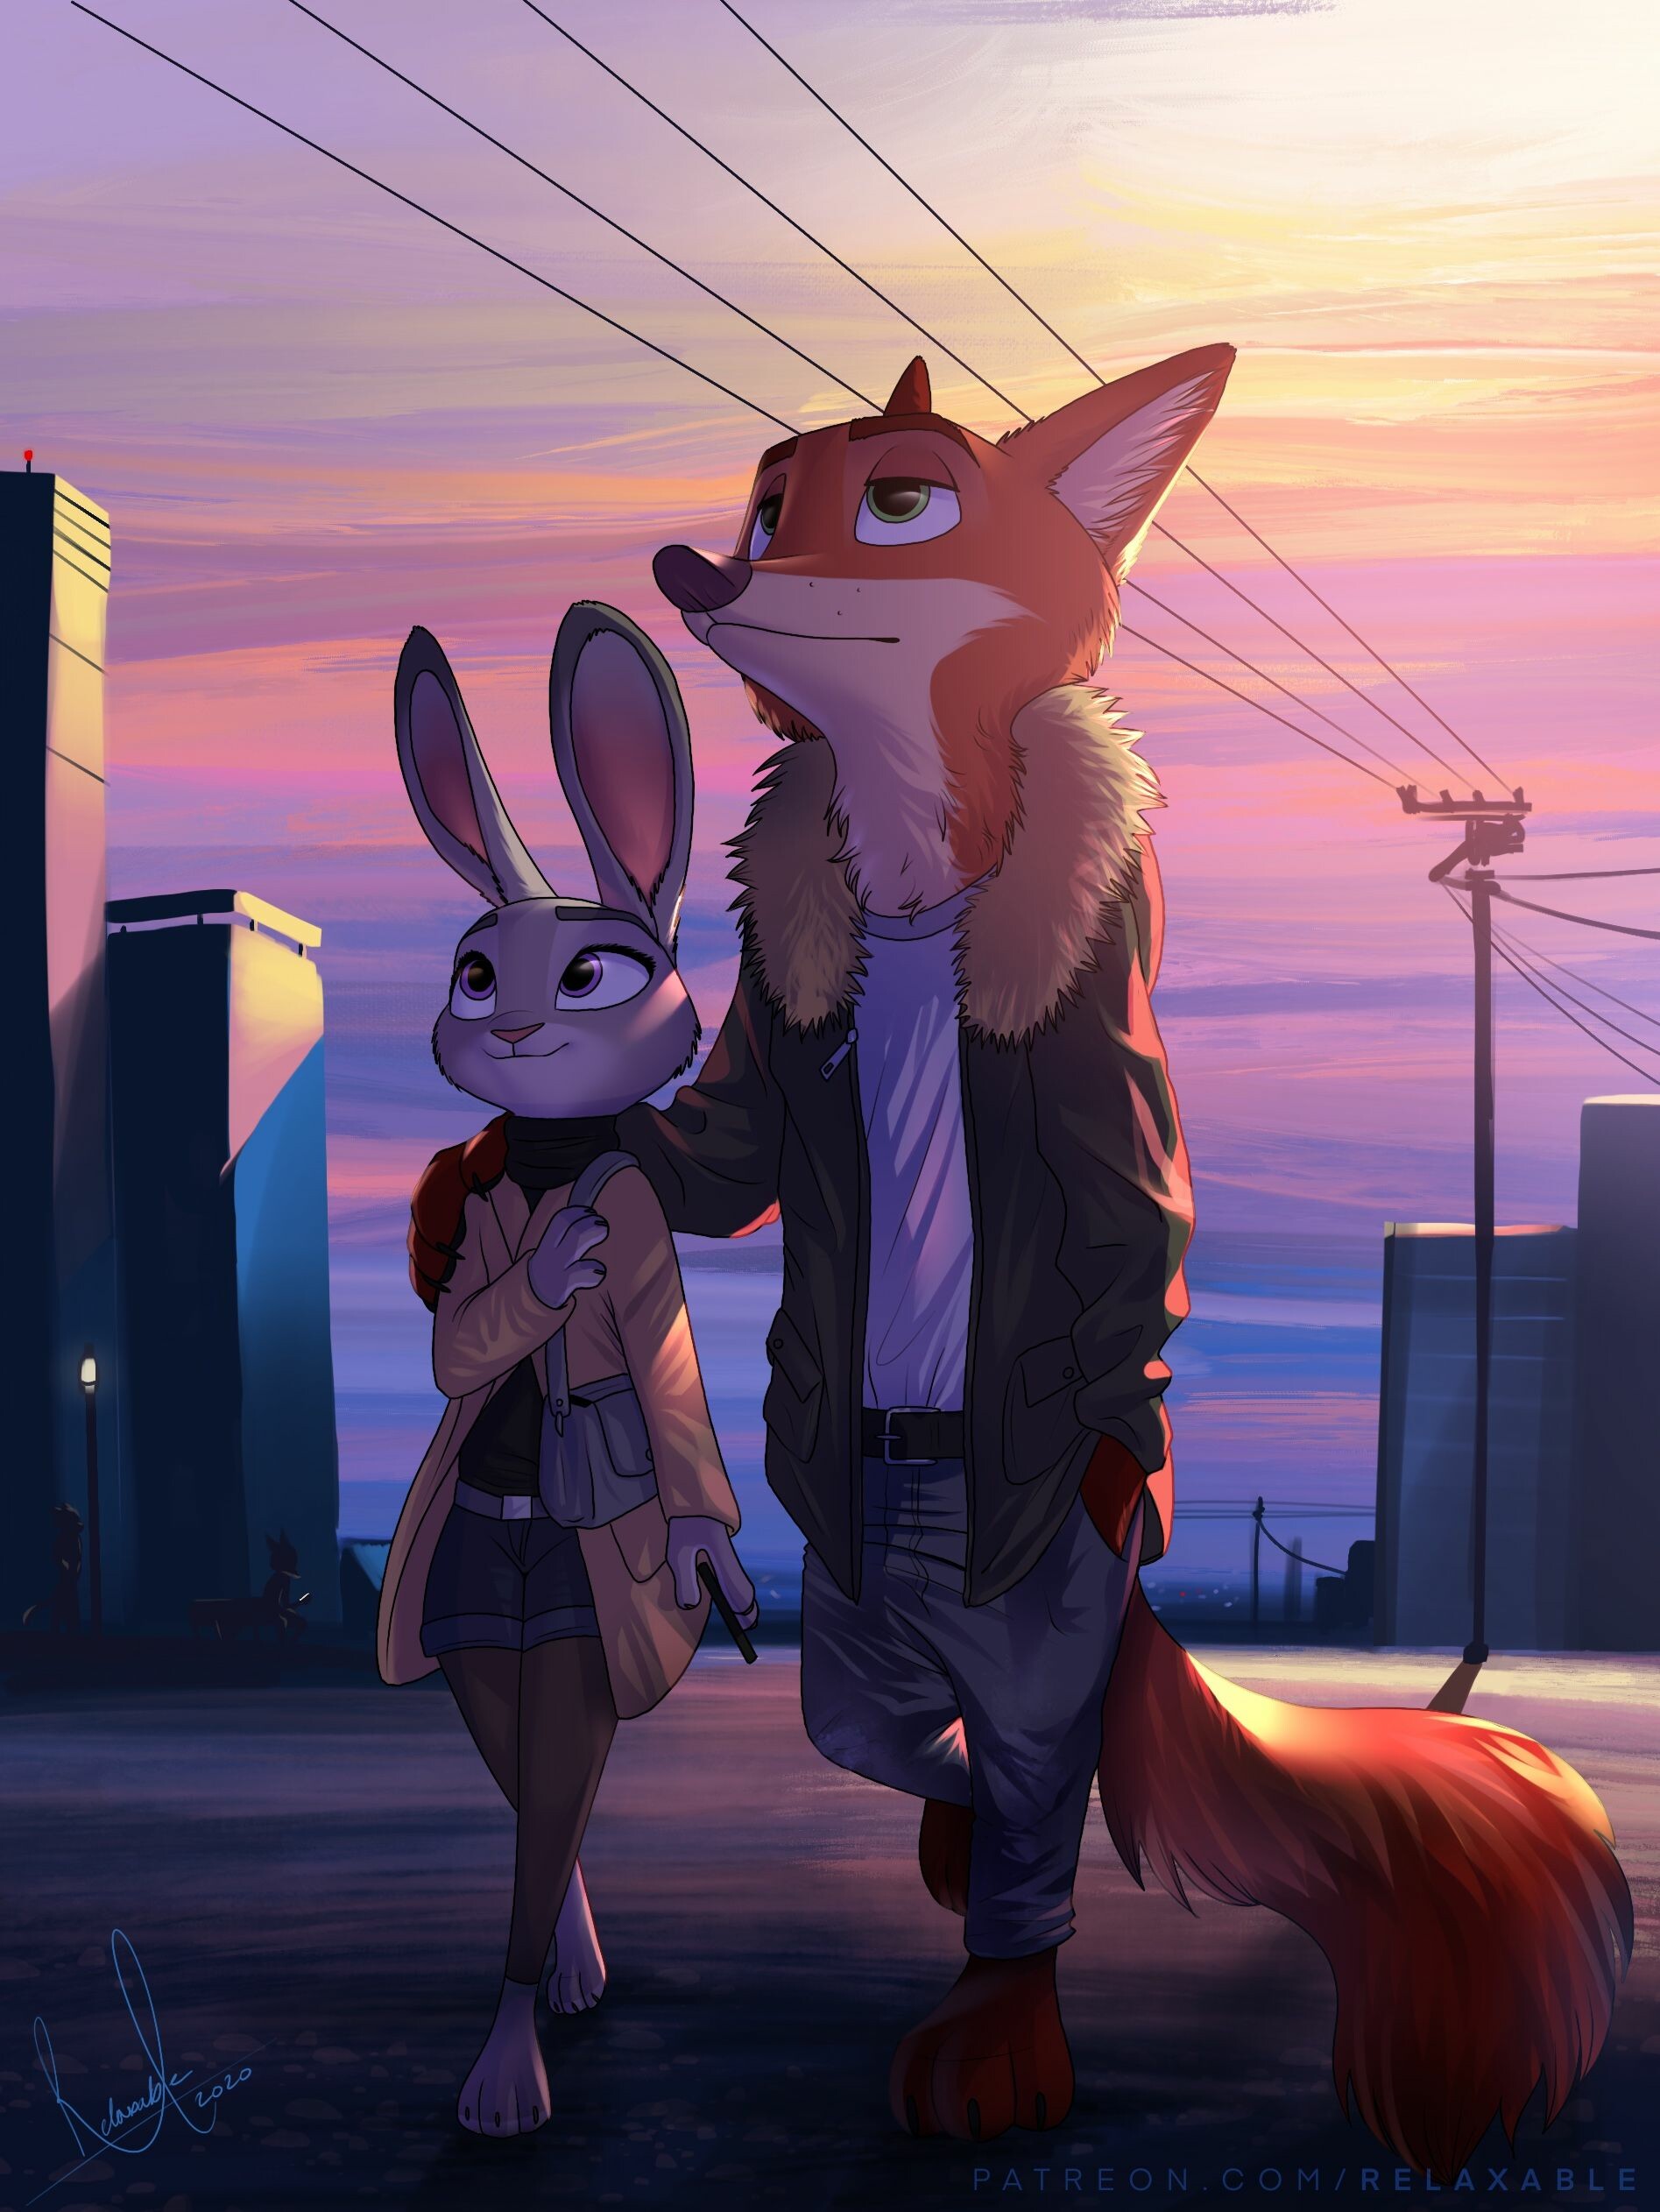 Zootopia: The film earned numerous accolades, It was named one of the top ten best films of 2016 by the American Film Institute. 1900x2530 HD Wallpaper.